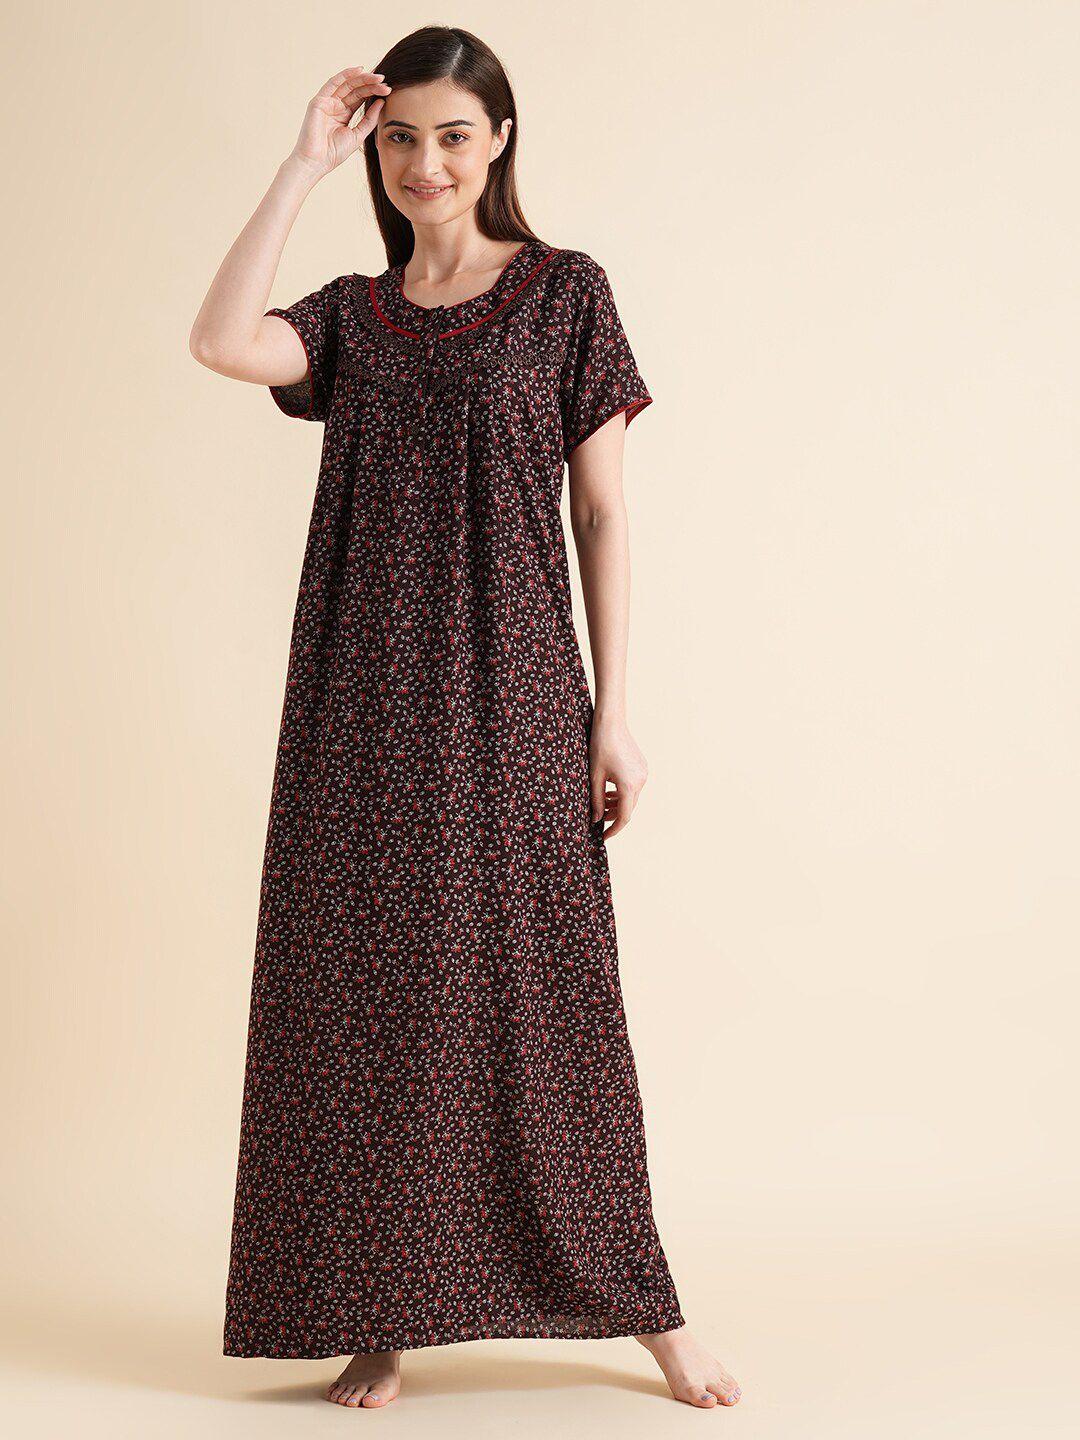 sweet dreams floral printed pure cotton maxi nightdress